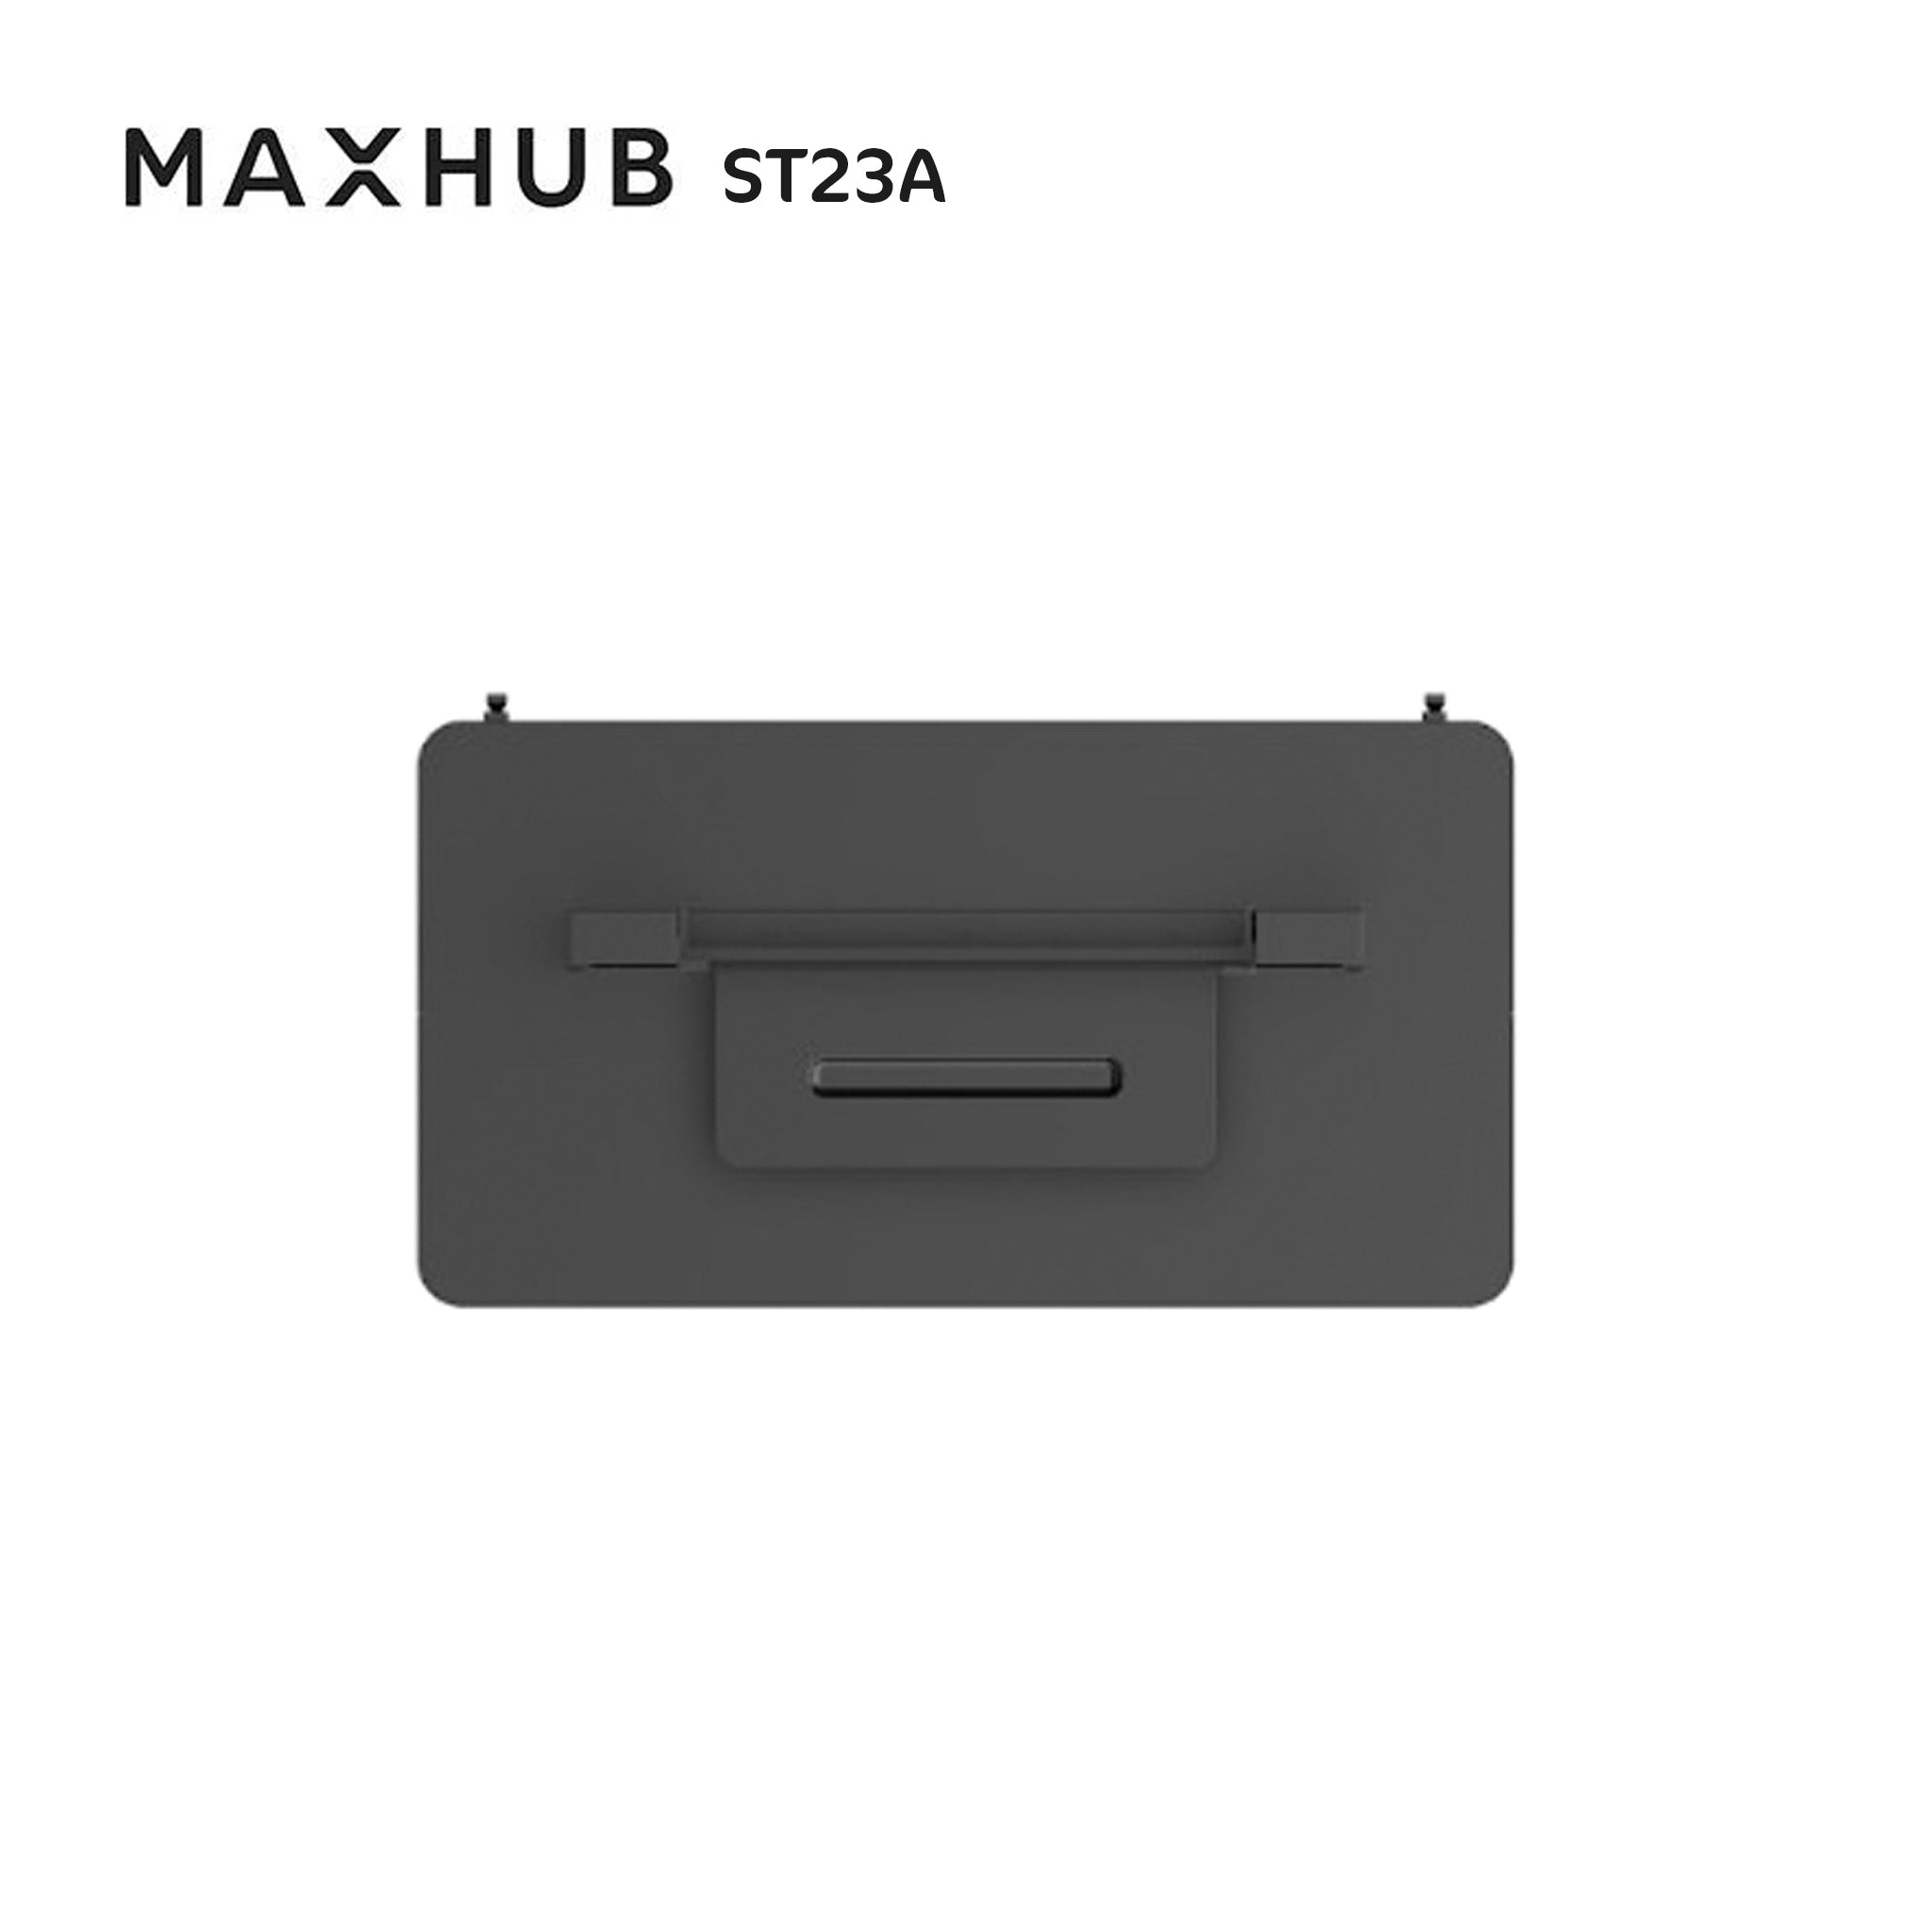 MAXHUB ST23A - Mobile Stand ST23A (For 65/75/86 Panels) | AL-VoIP Store